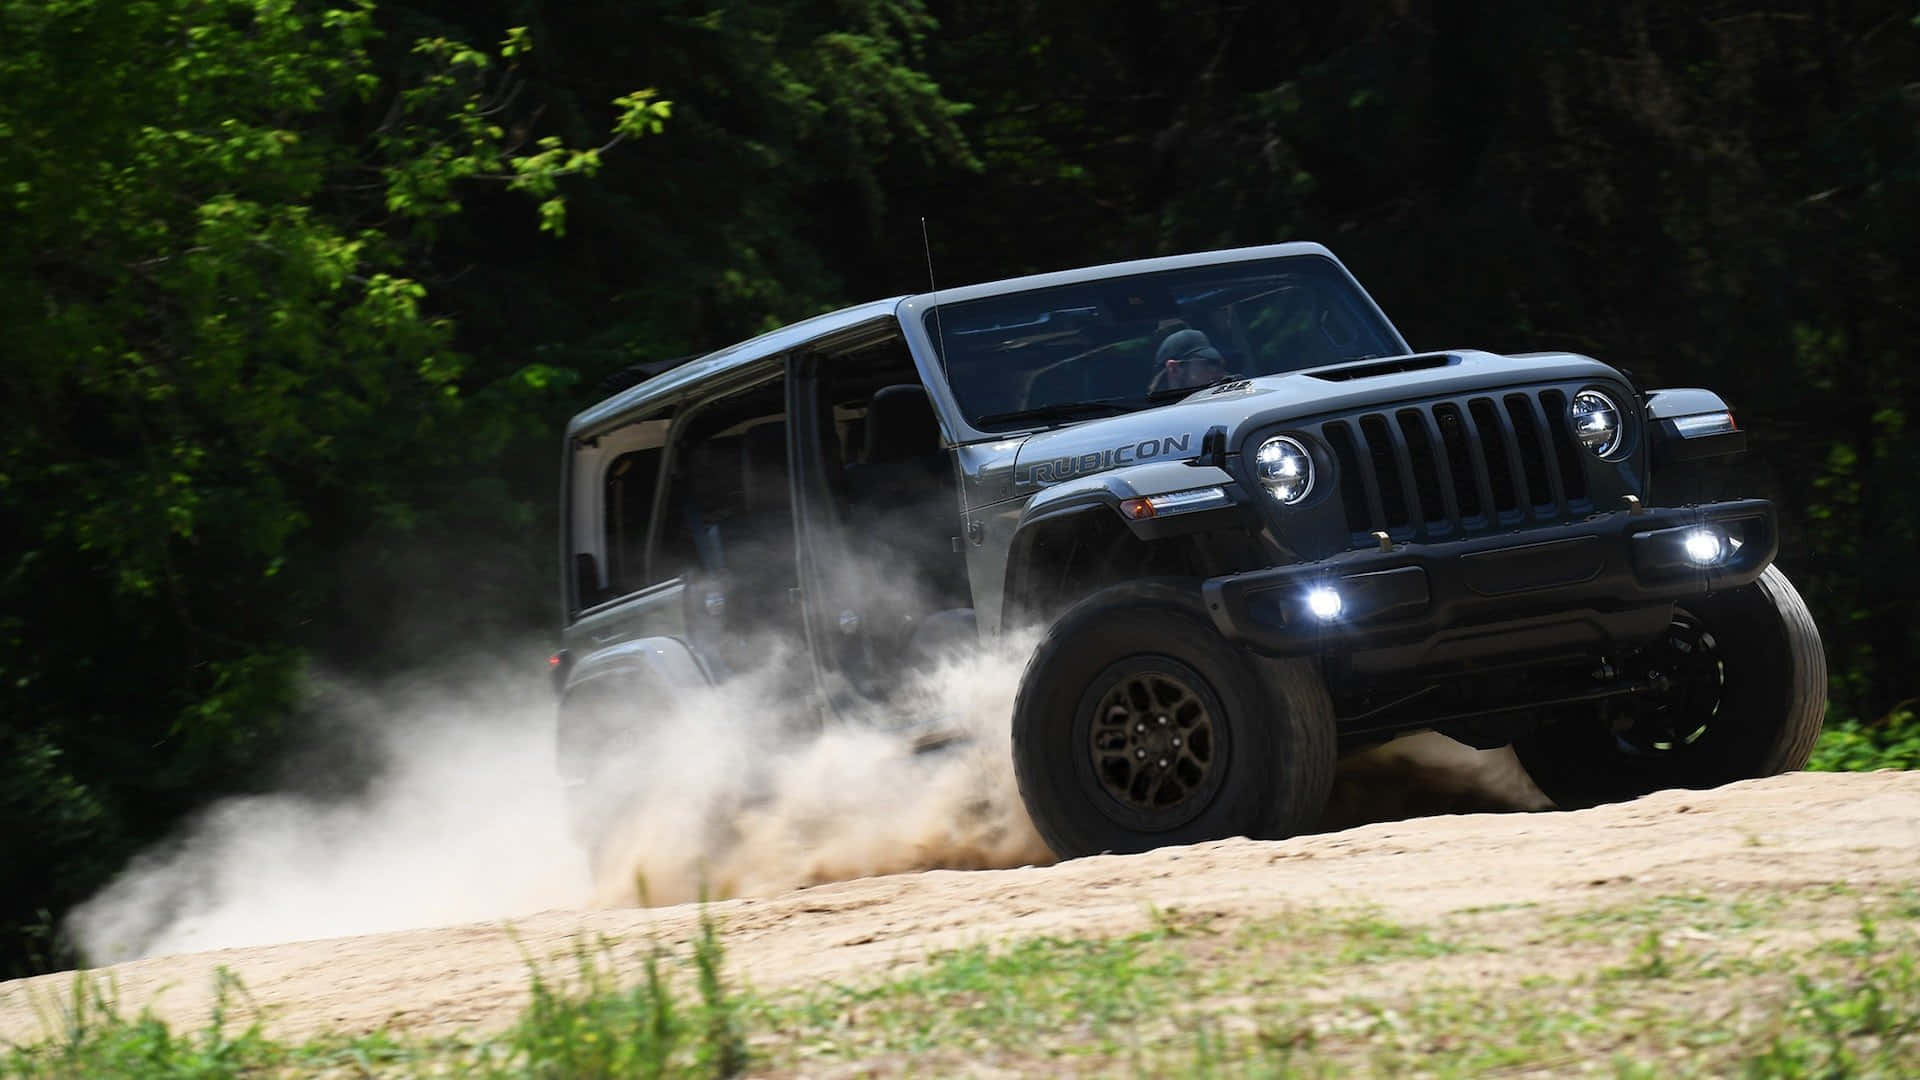 Get off the beaten path with the powerful and reliable Jeep.